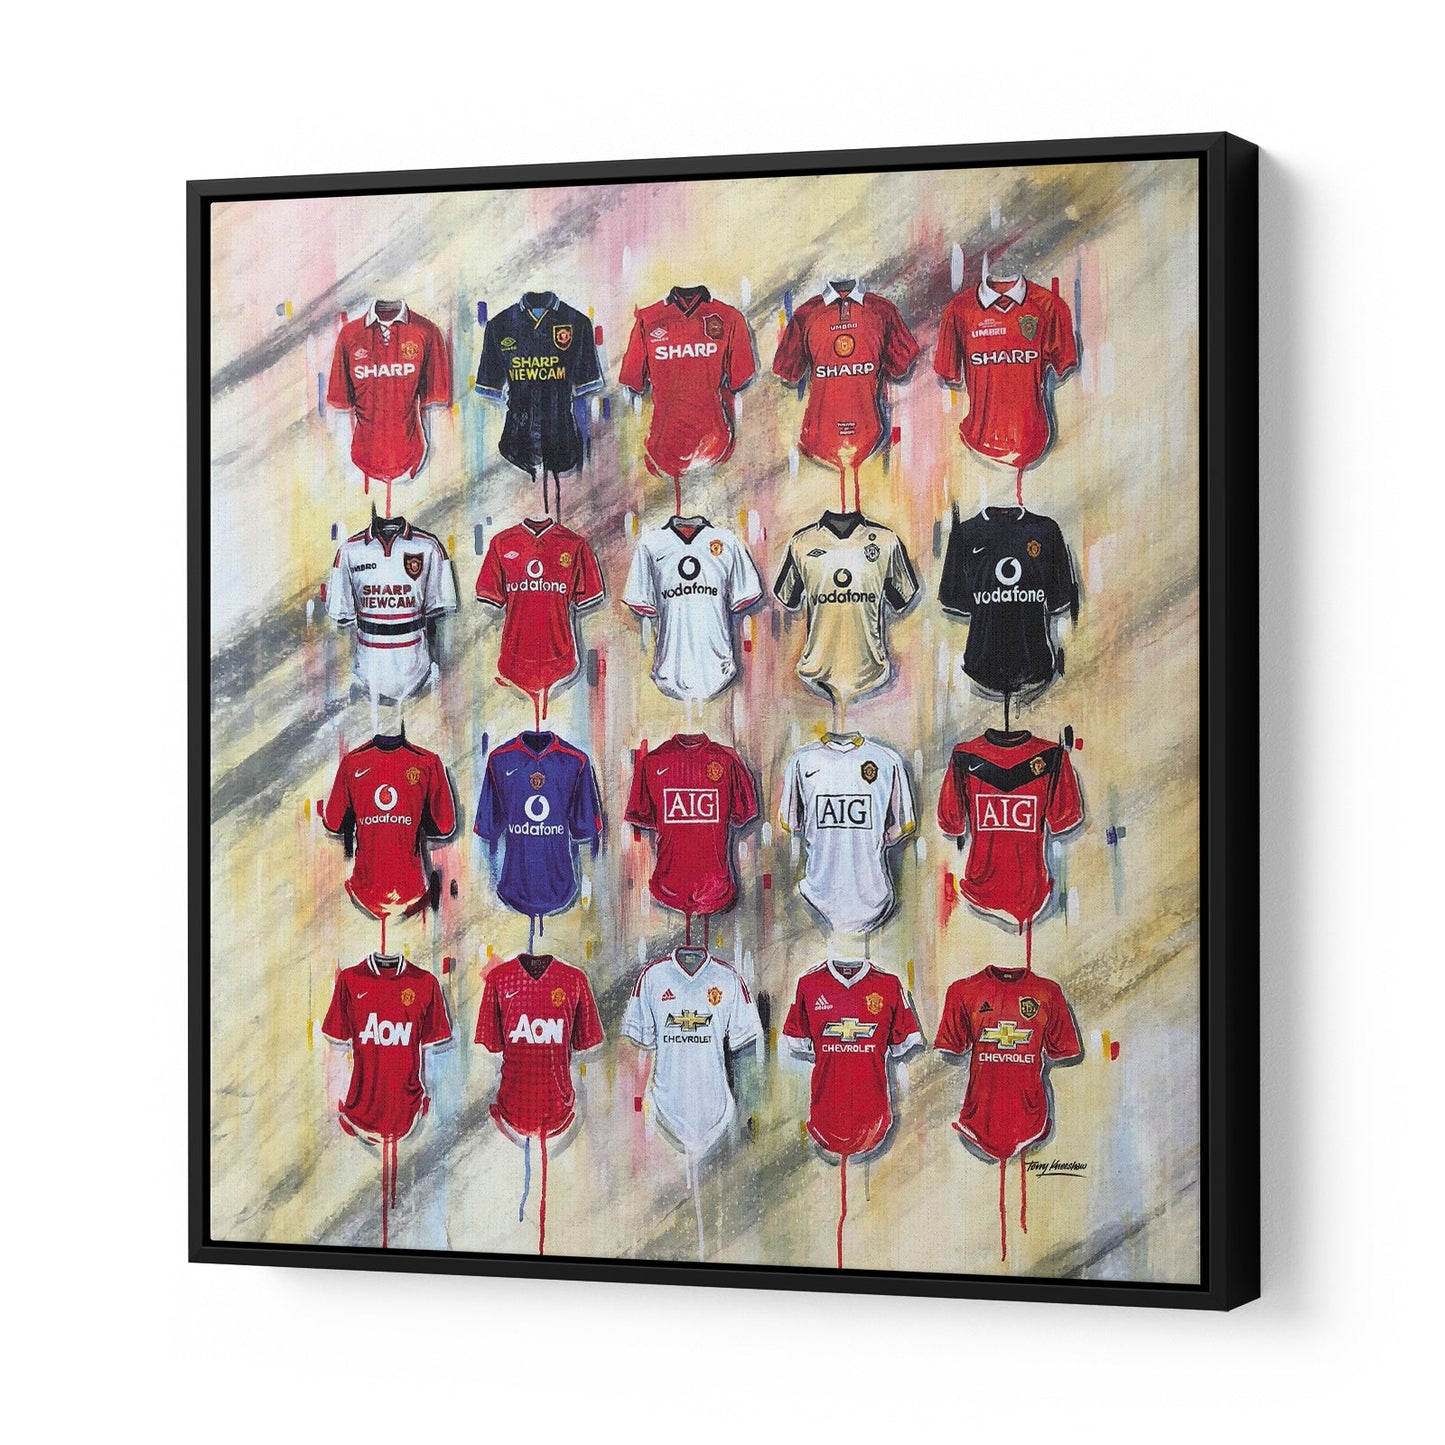 These Red Devils canvases from Terry Kneeshaw feature stunning images of Manchester United and its players, and are available in various sizes (20x20, 30x30 or 40x40) and framed or unframed in a black floating frame. Perfect for any fan or collector, these high-quality canvases add a touch of the Red Devils to your home or office decor.